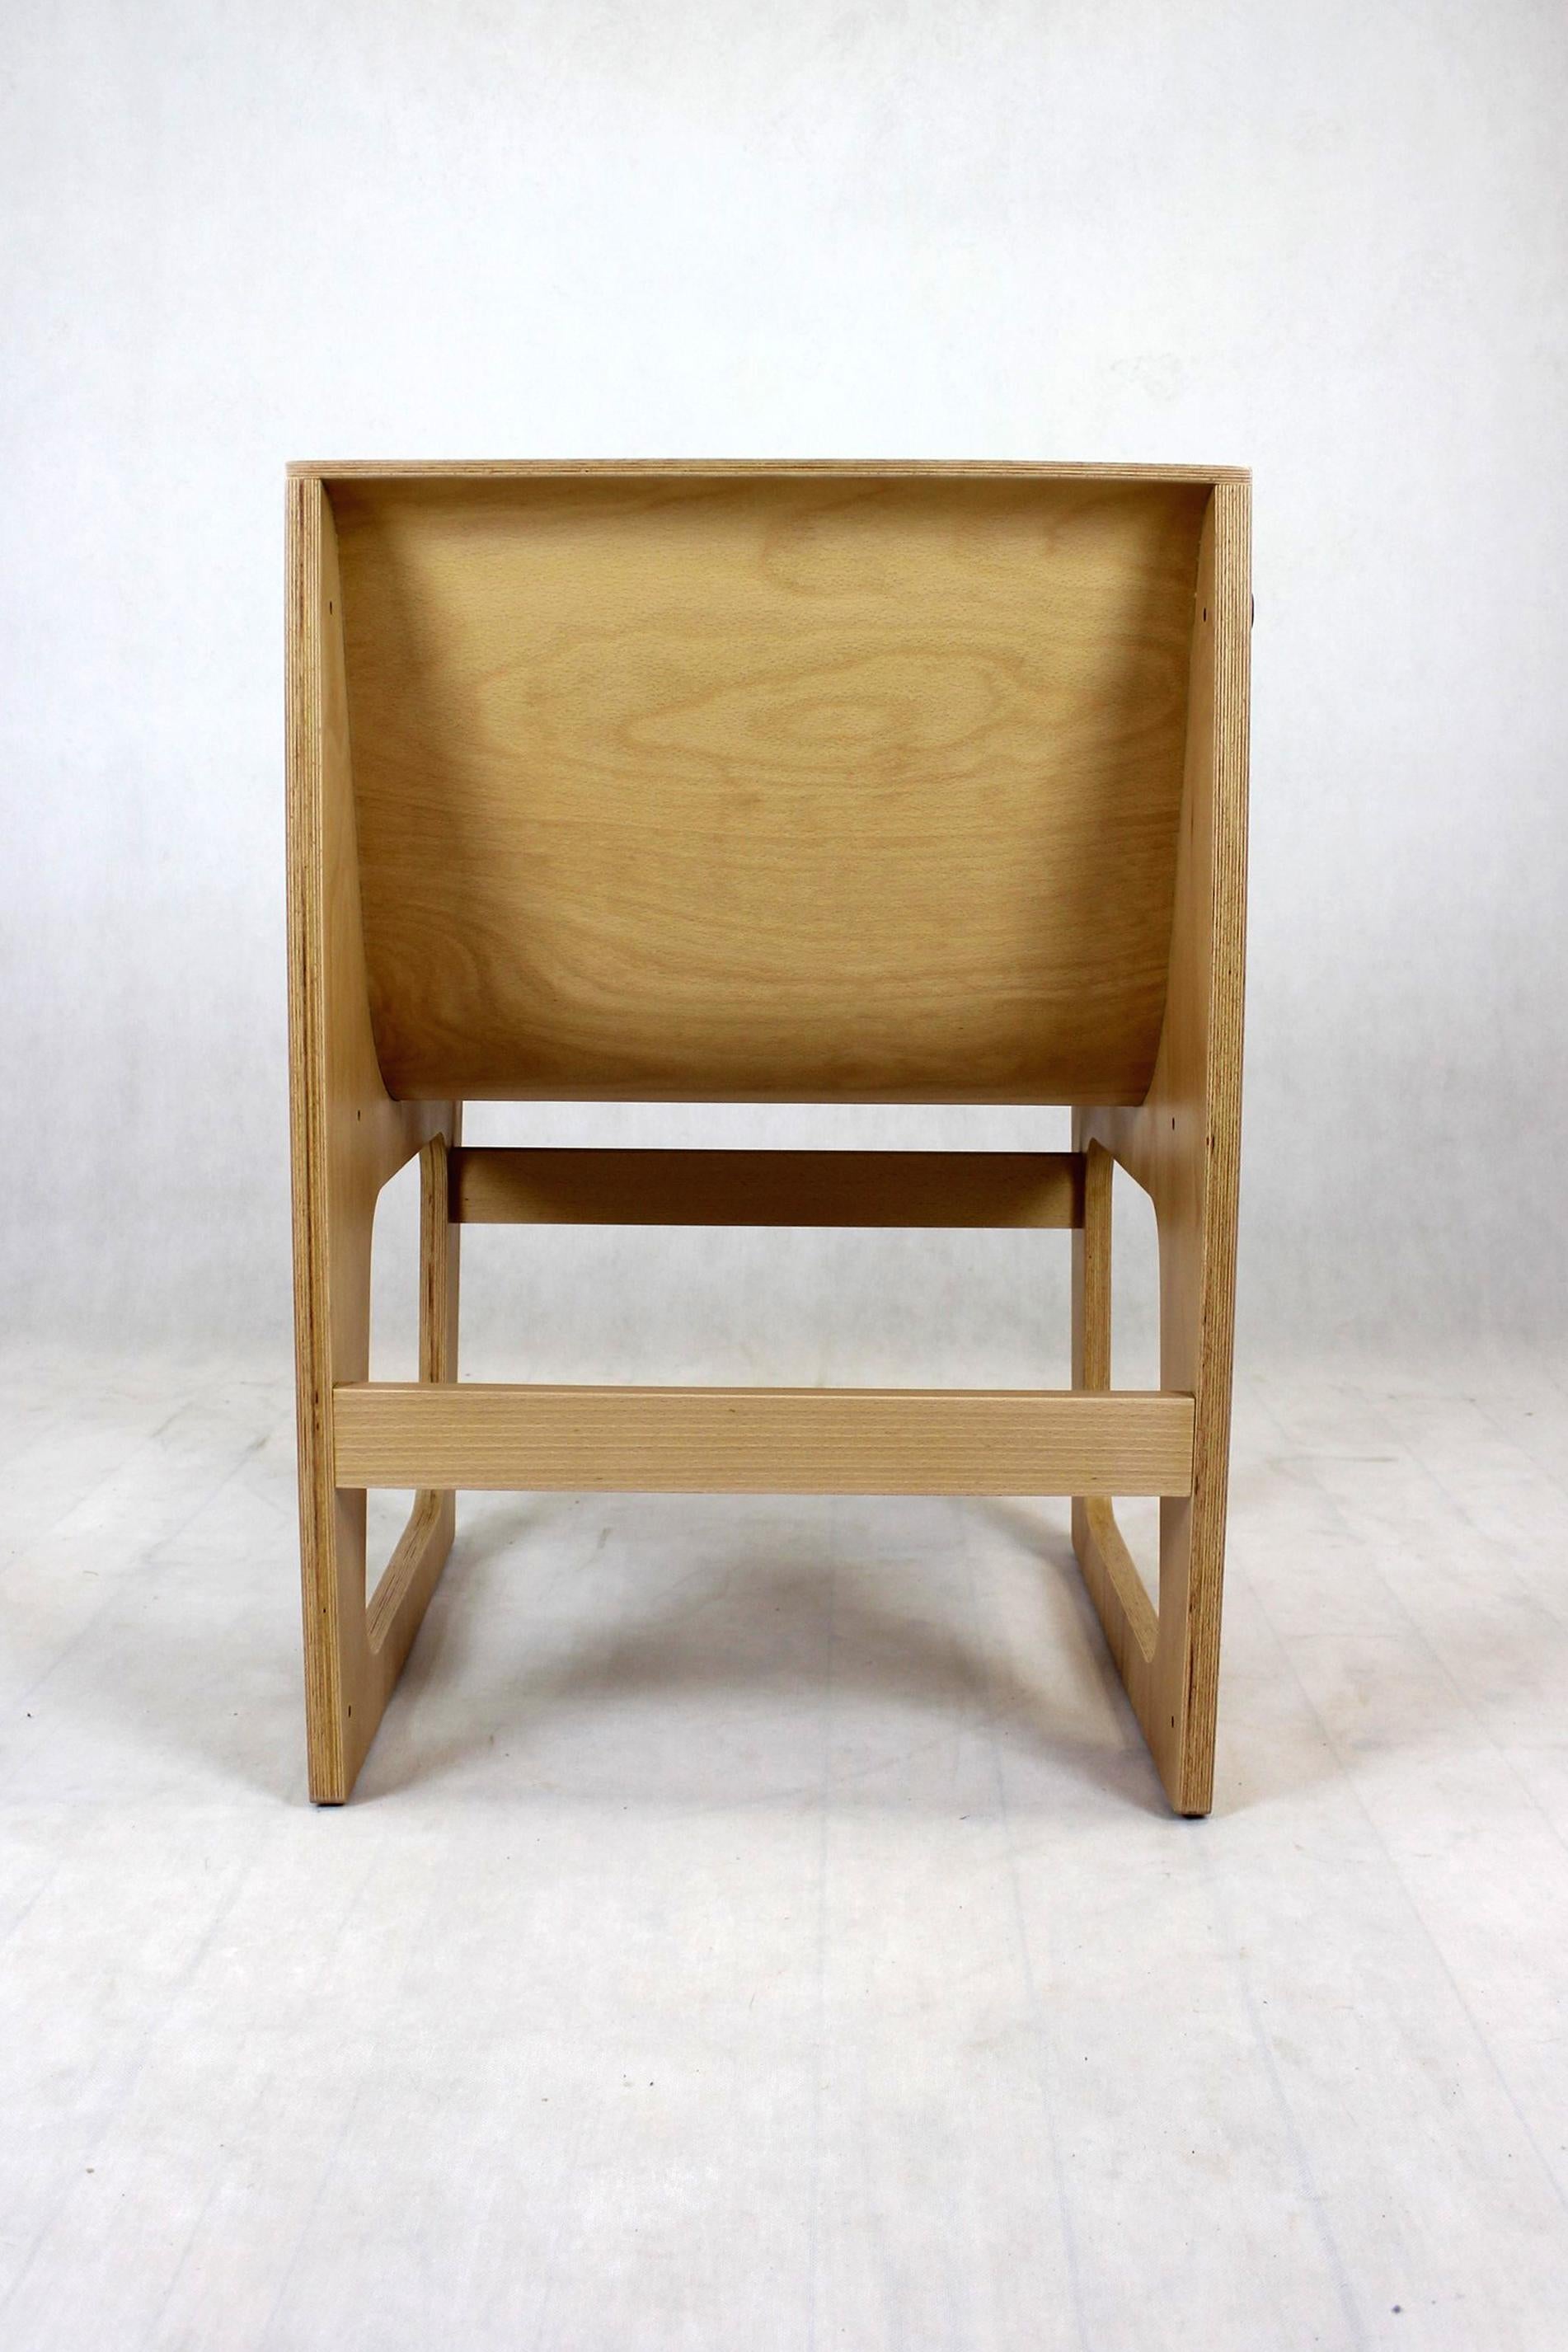 Beech Plywood Symposio Bench / Chairs by René Šulc for Ton, 2010s 9